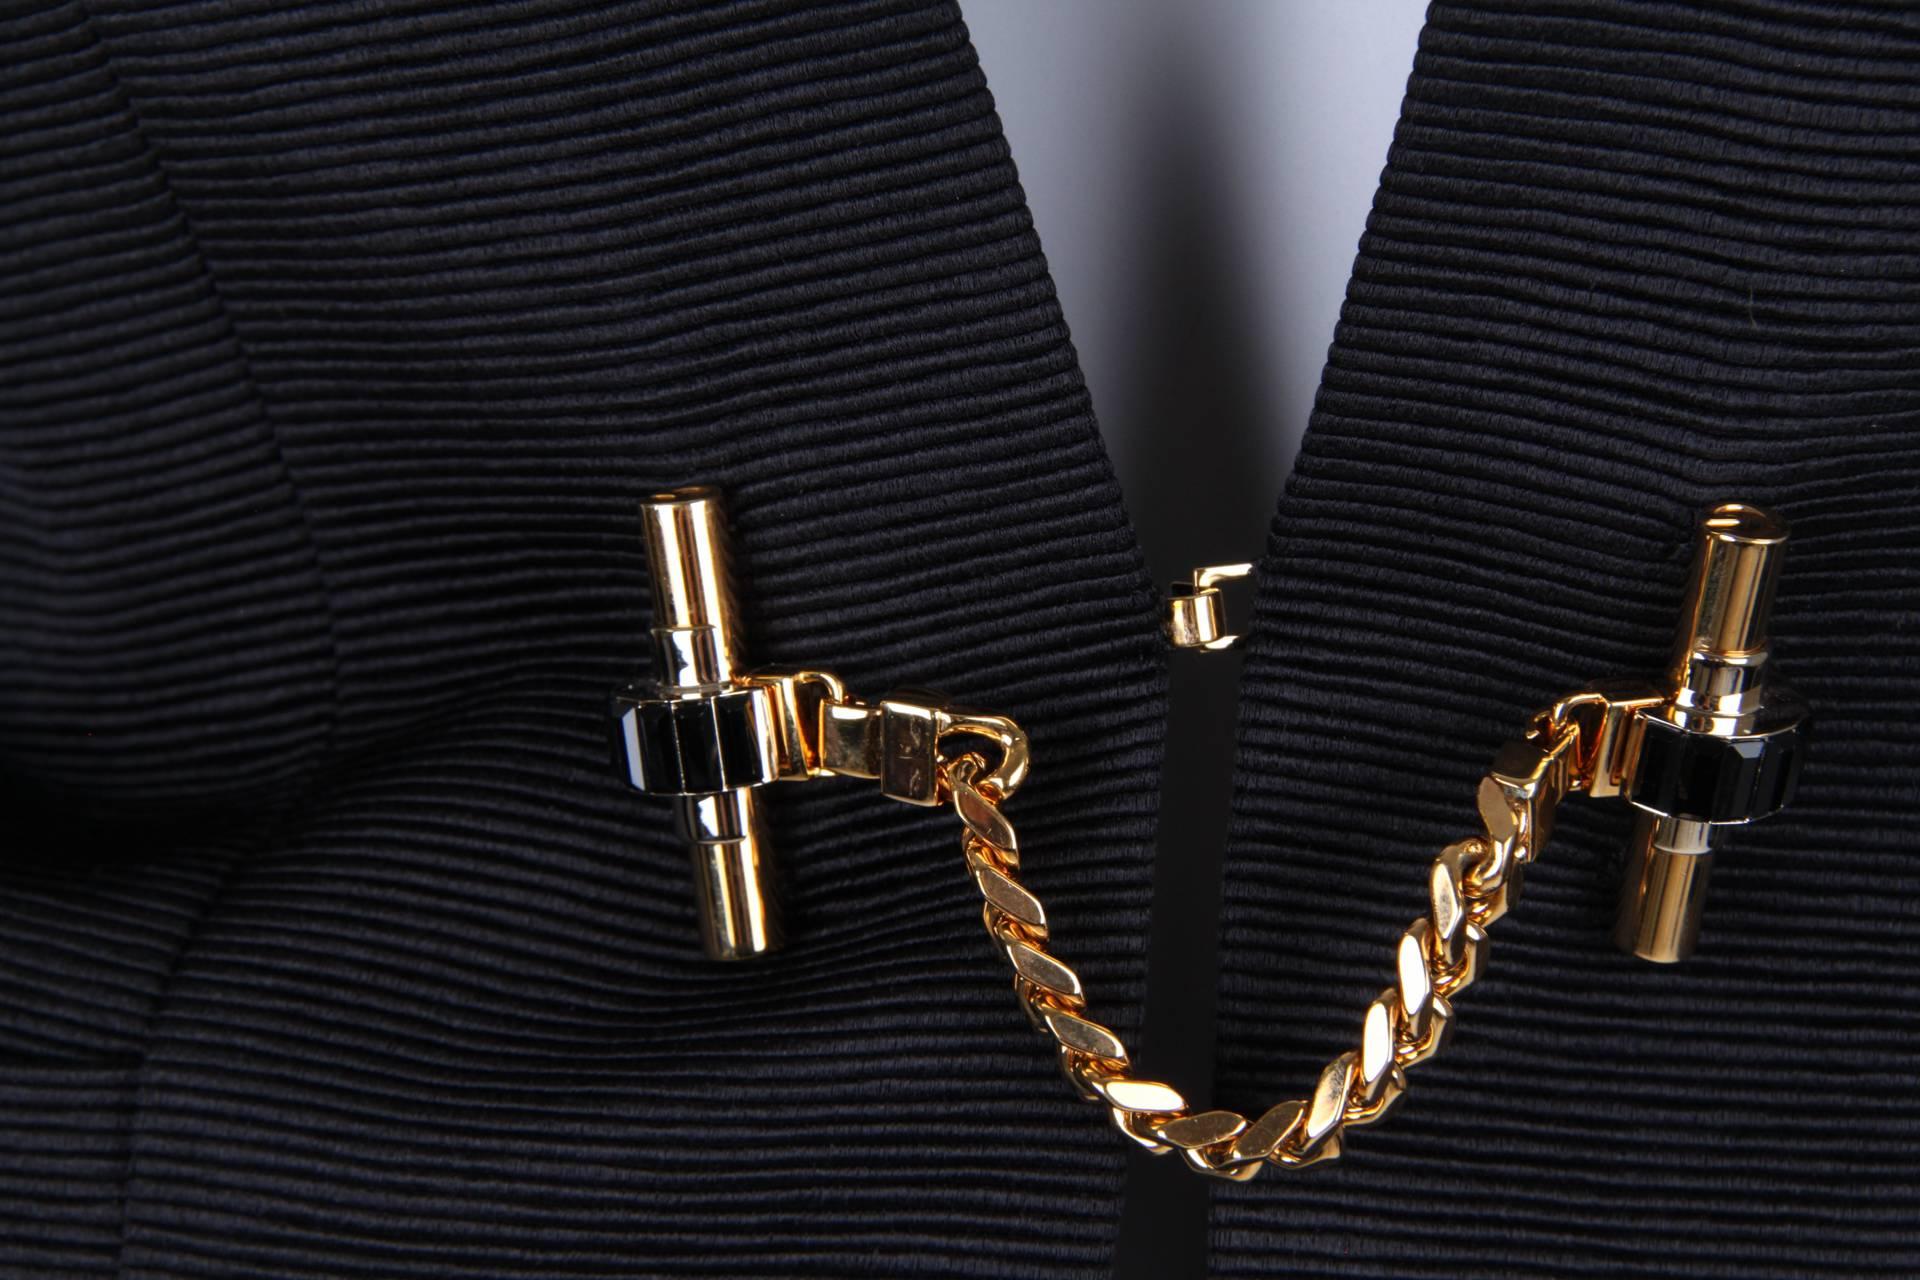 Magnificent Gucci jacket with golden detaling at the front.

Crafted in a softly shiny cotton and silk blend with small ridges. A narrow collar and attached lapels. Two welt pockets above the hips. Gold chain closure, on both sides a golden bar